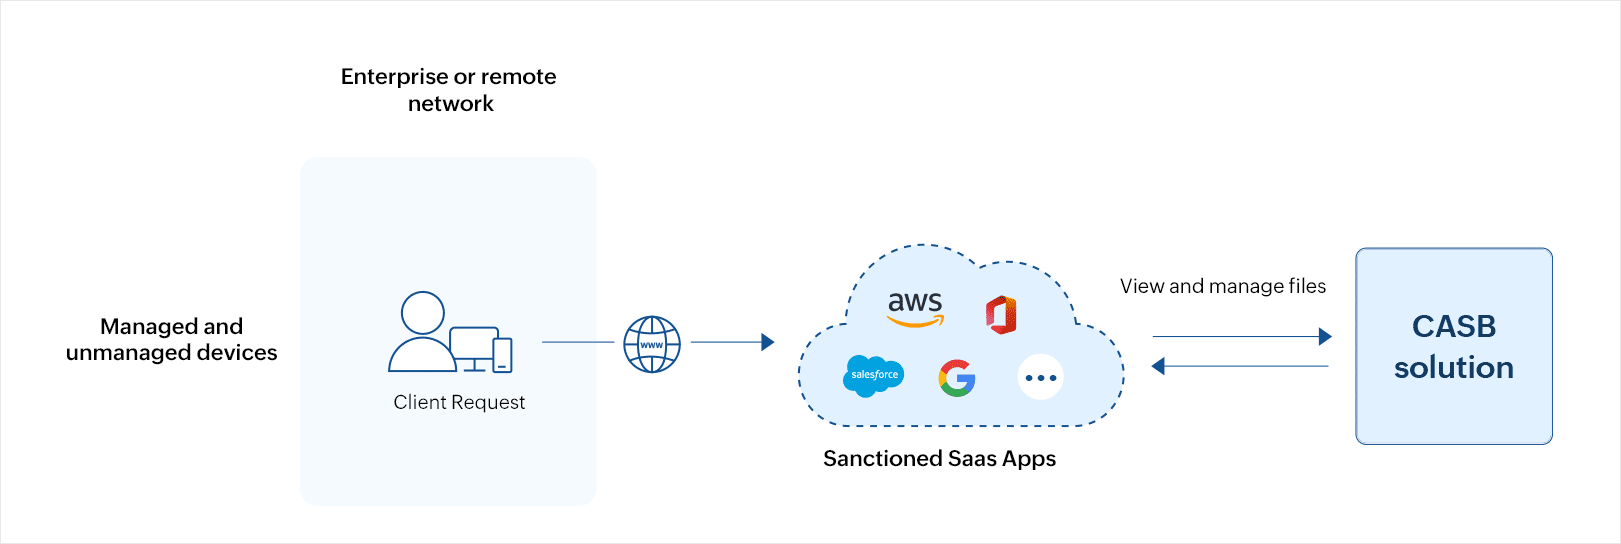 API scanning CASB architecture: The CASB directly integrates with cloud service provider's API to view and manage data and files